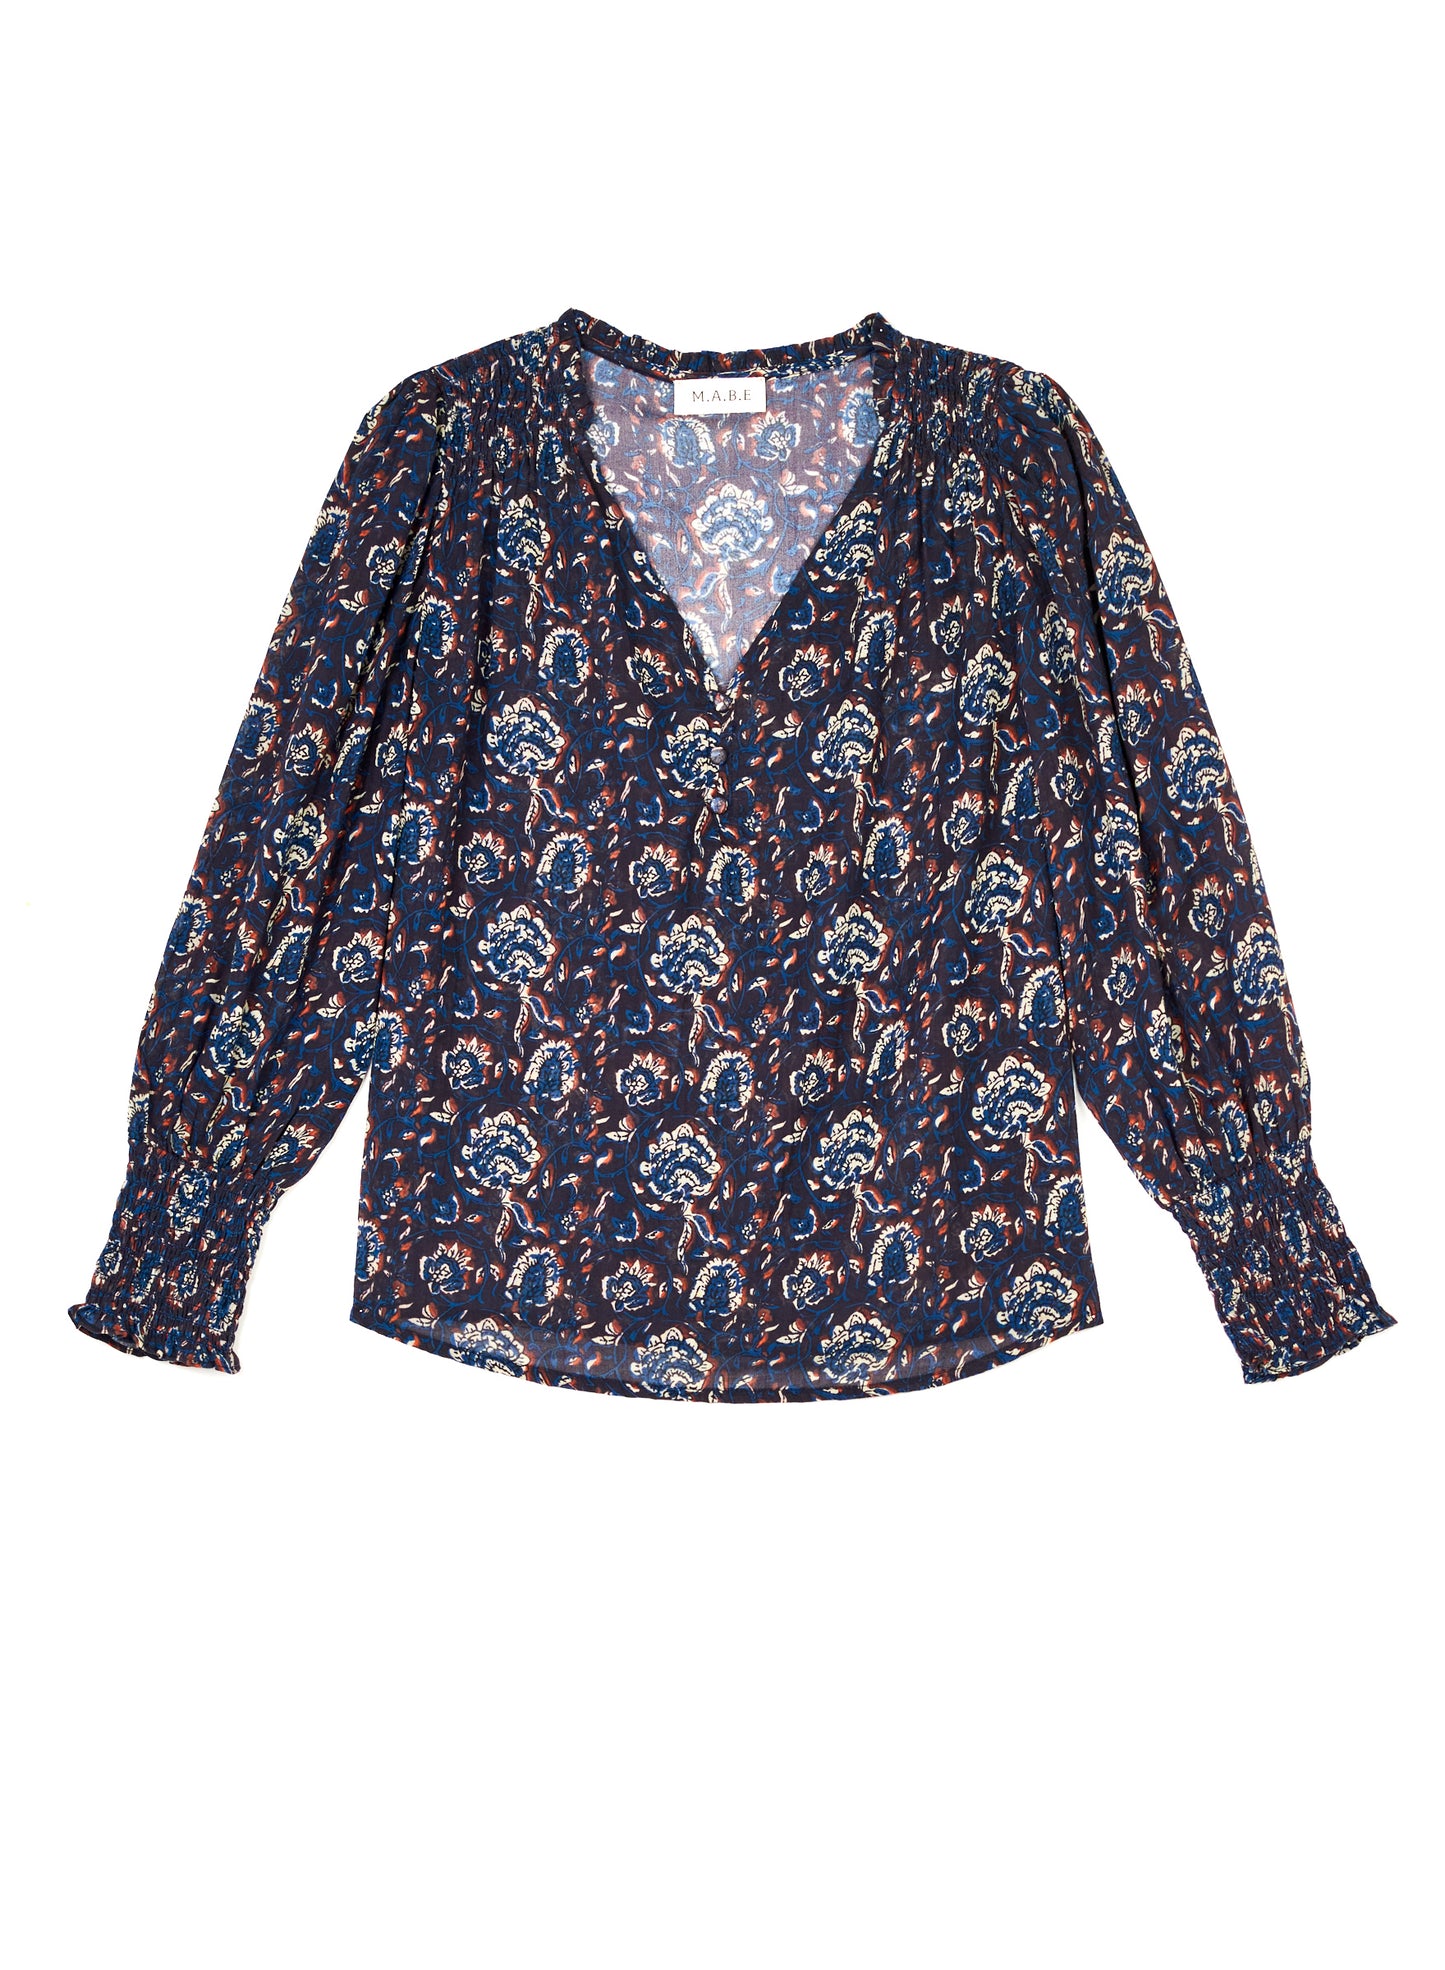 Flat lay view of the M.A.B.E. Seren Printed Long Sleeve Top, sold at Harbour Thread